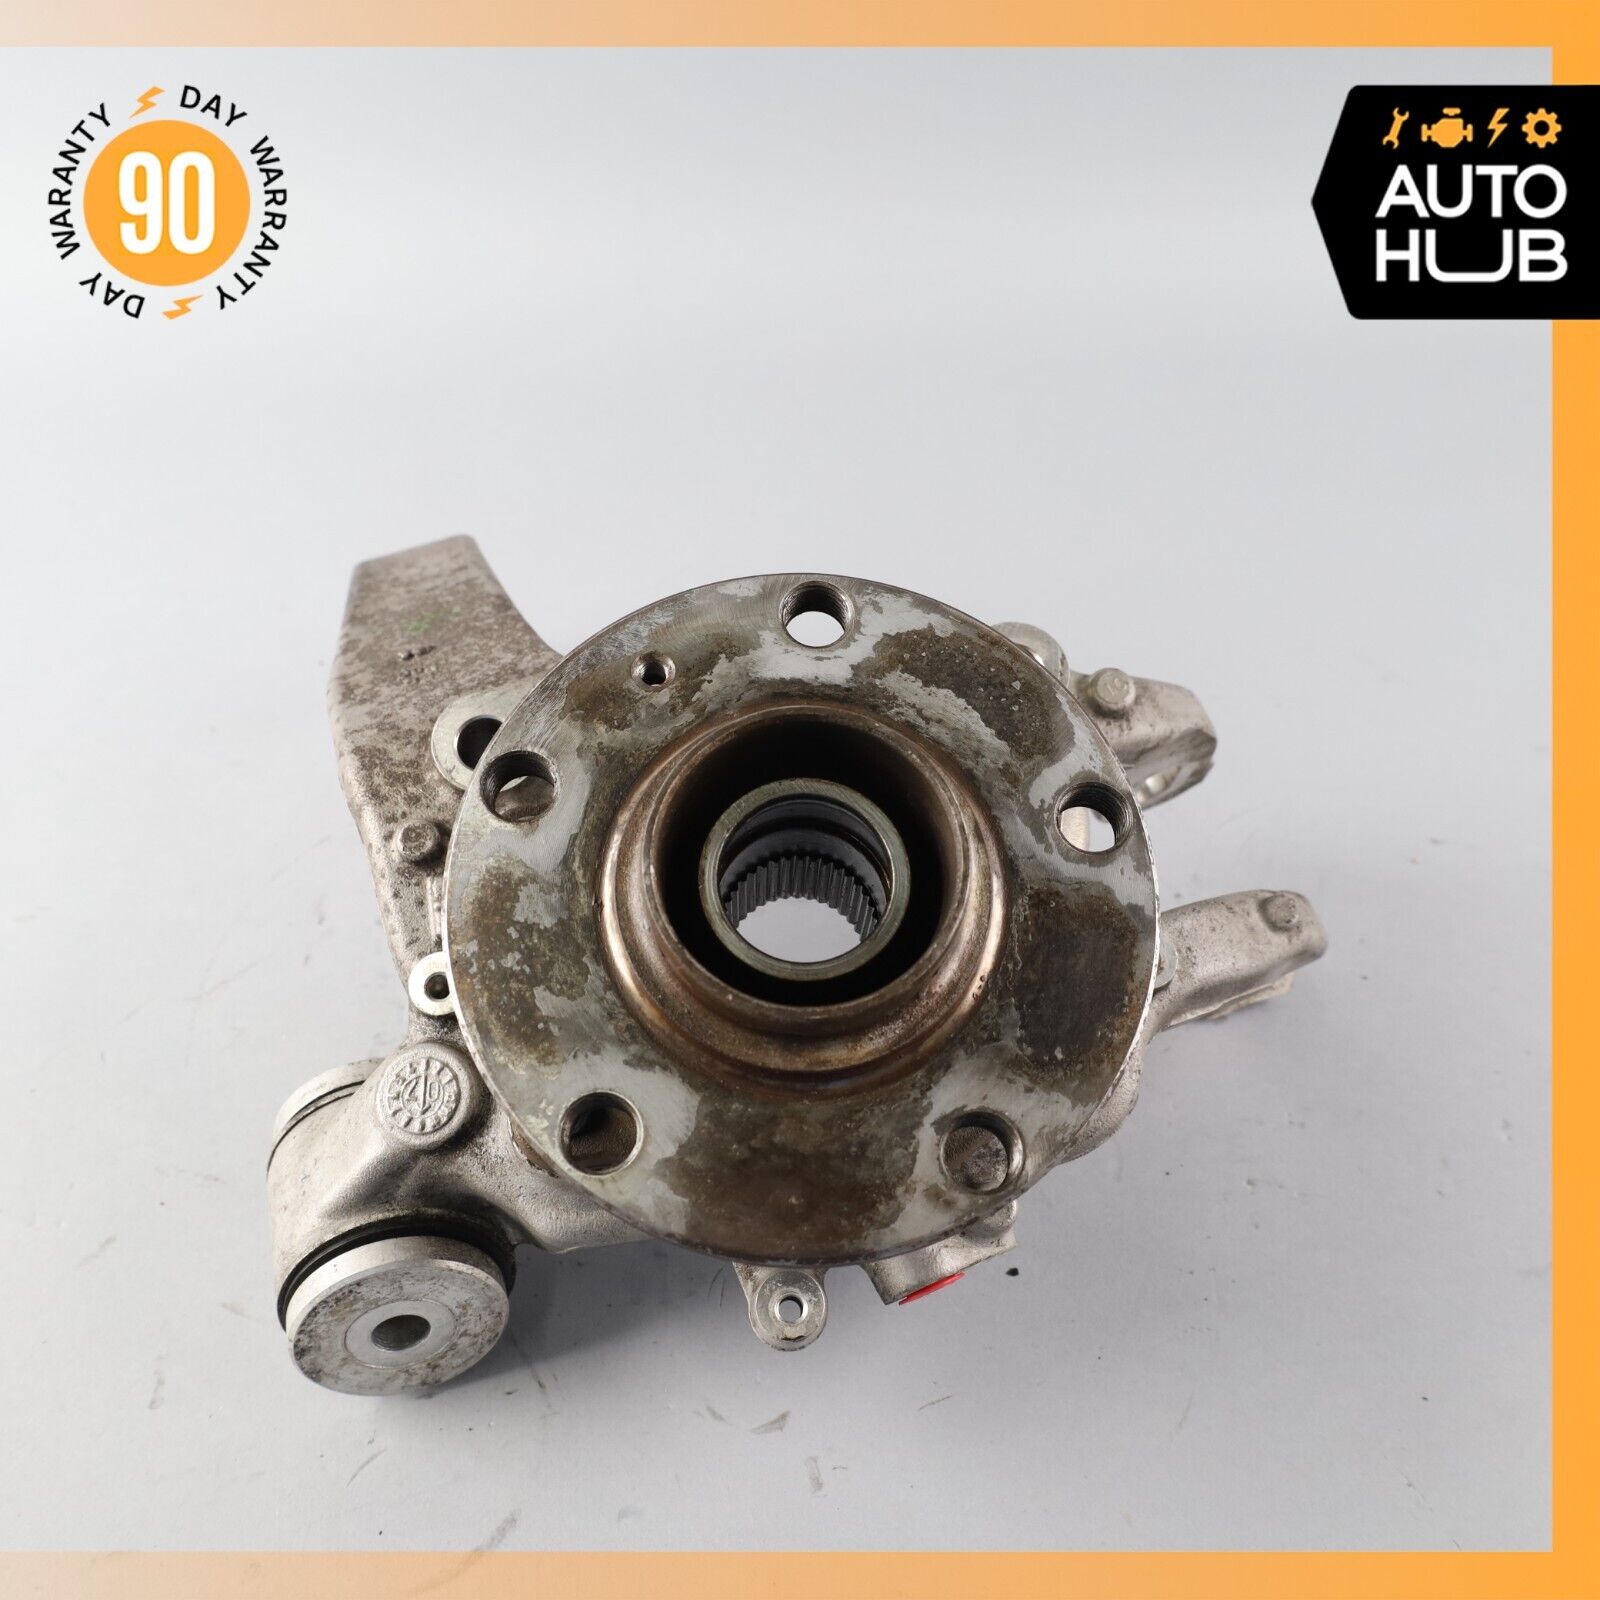 07-10 Bentley Continental GTC Rear Right Side Spindle Knuckle Hub OEM 63k